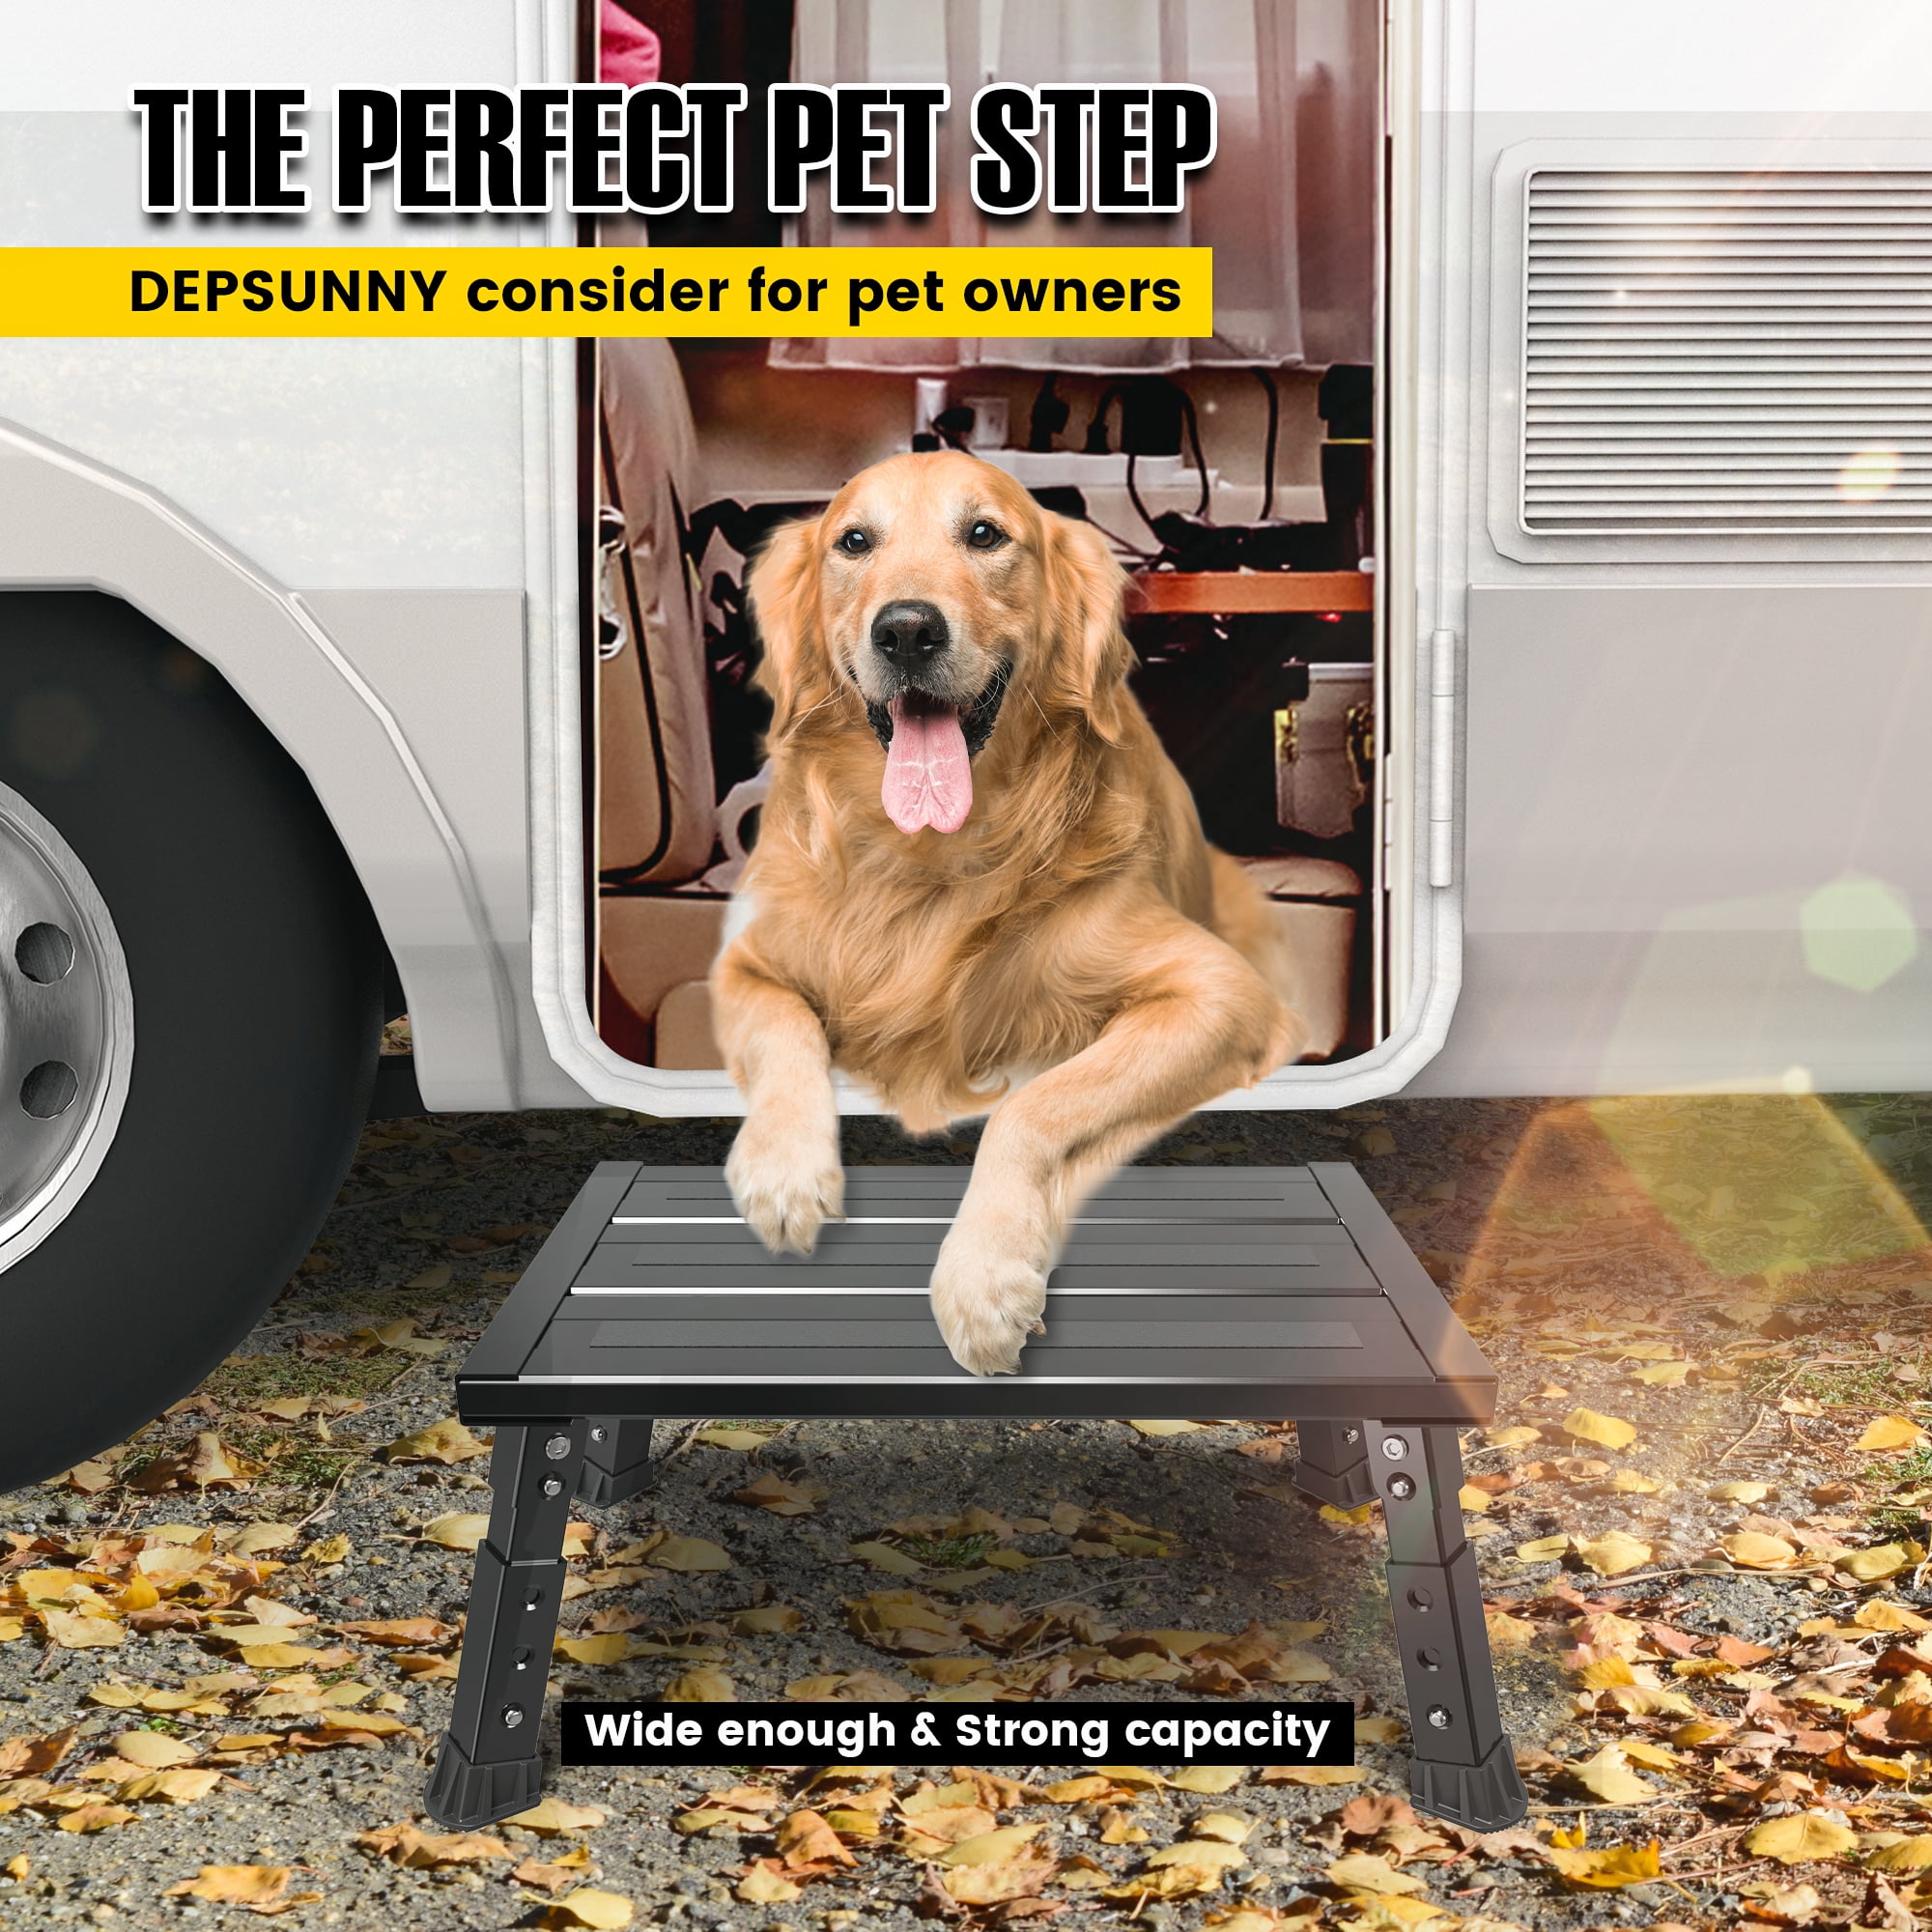 GanFindX Adjustable Height Aluminum RV Steps Stool Supports Up to